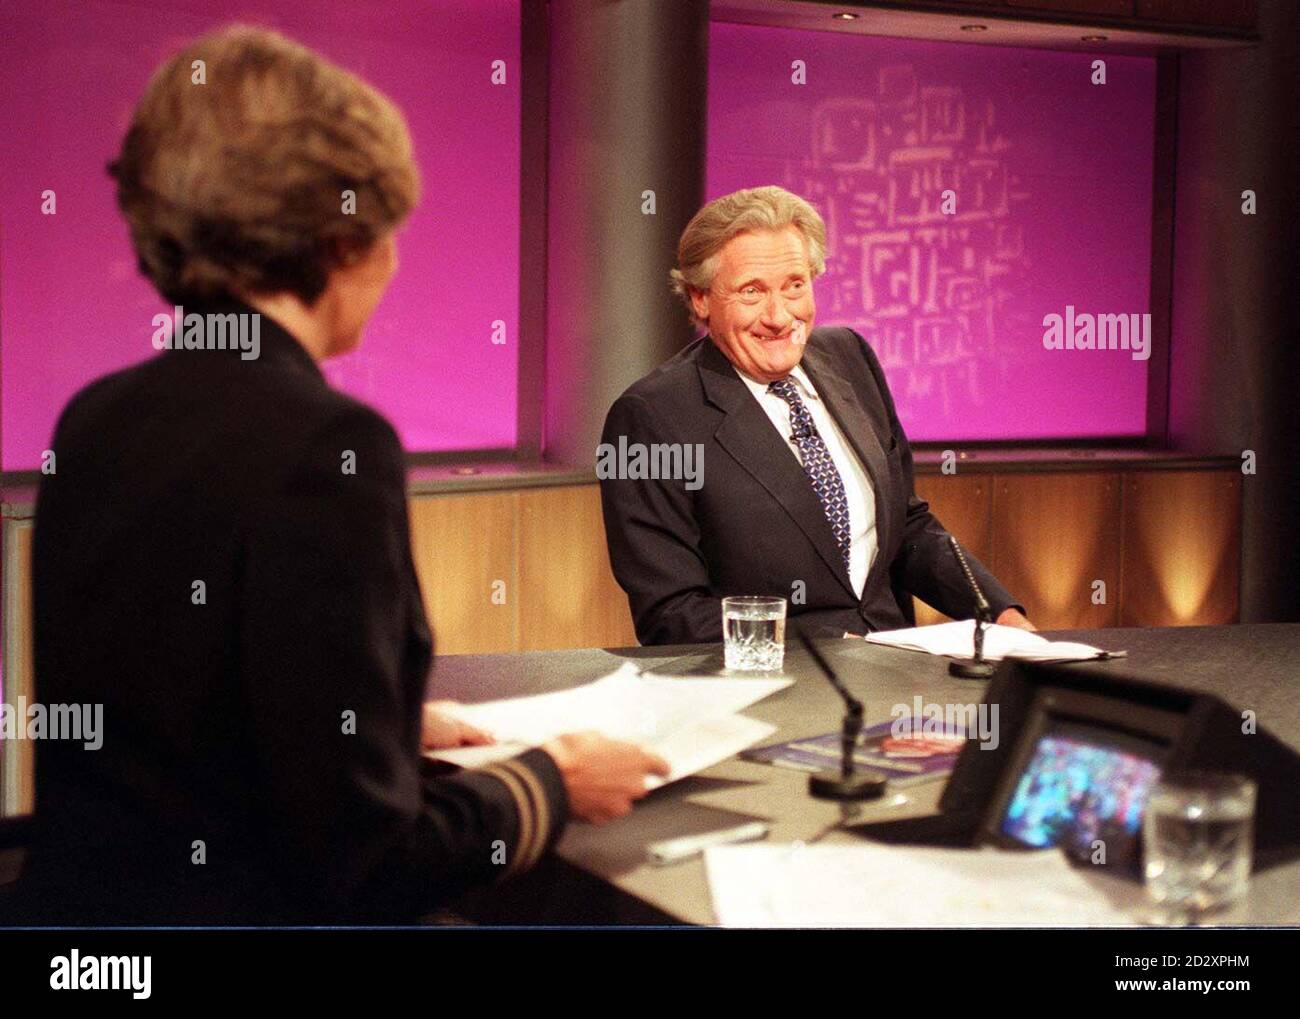 Deputy Prime Minister Michael Heseltine, on  the 'The ITV 500: The People's Election', programme today (Monday), where Sue Lawley (foreground) concludes the live debate series by inviting the party leaders to answer questions from the studio audience. Photo by John Stillwell. Stock Photo